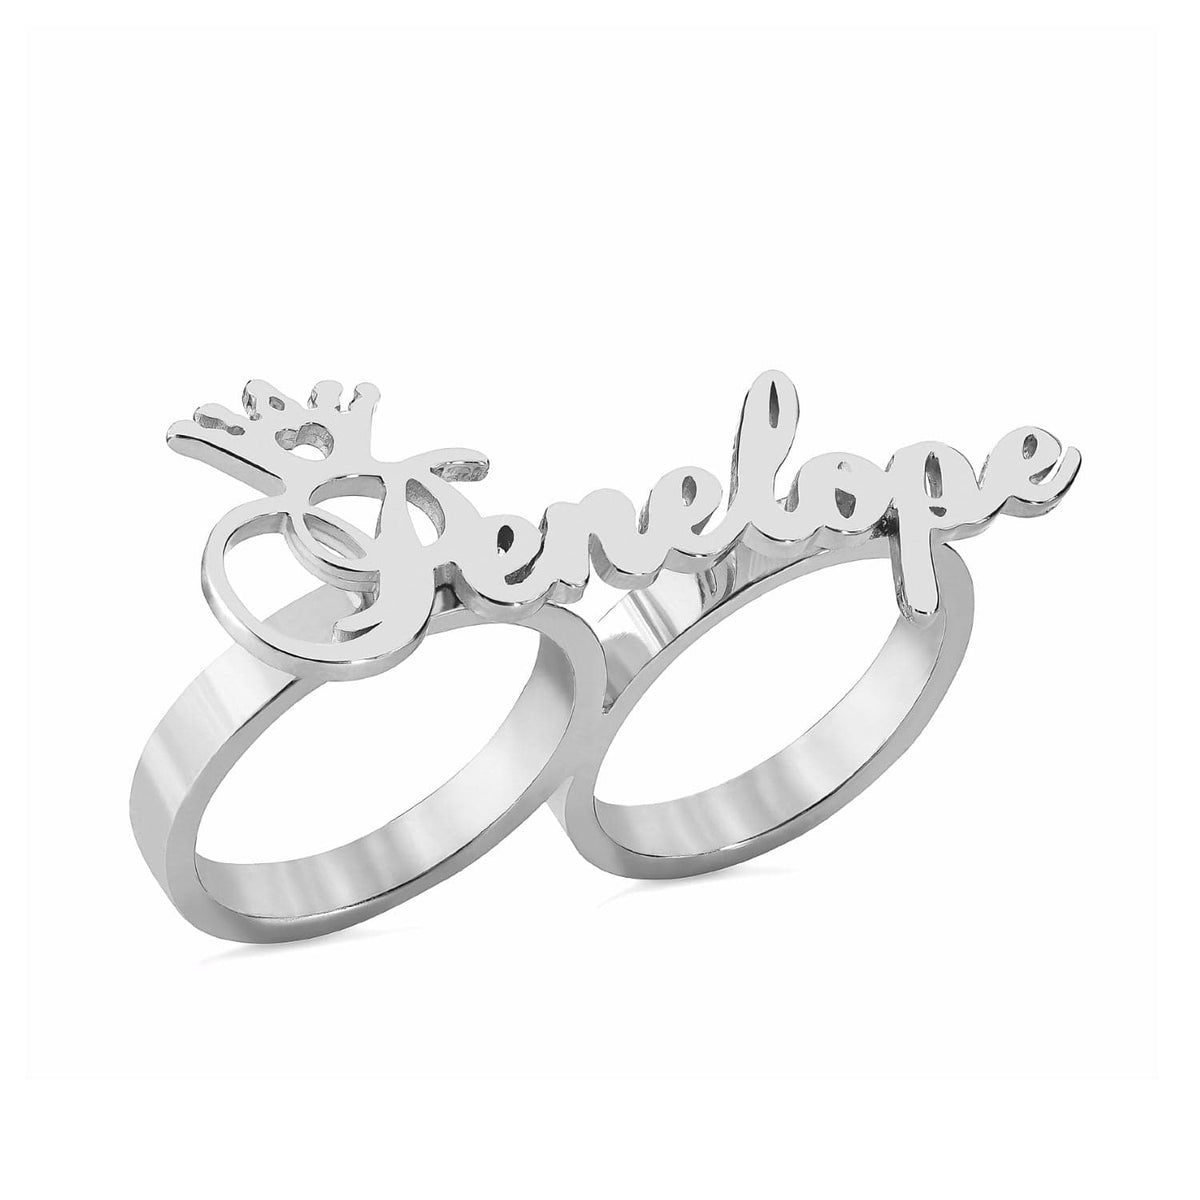 Silver Plated Double-Finger Name Ring with Crown on First Initial